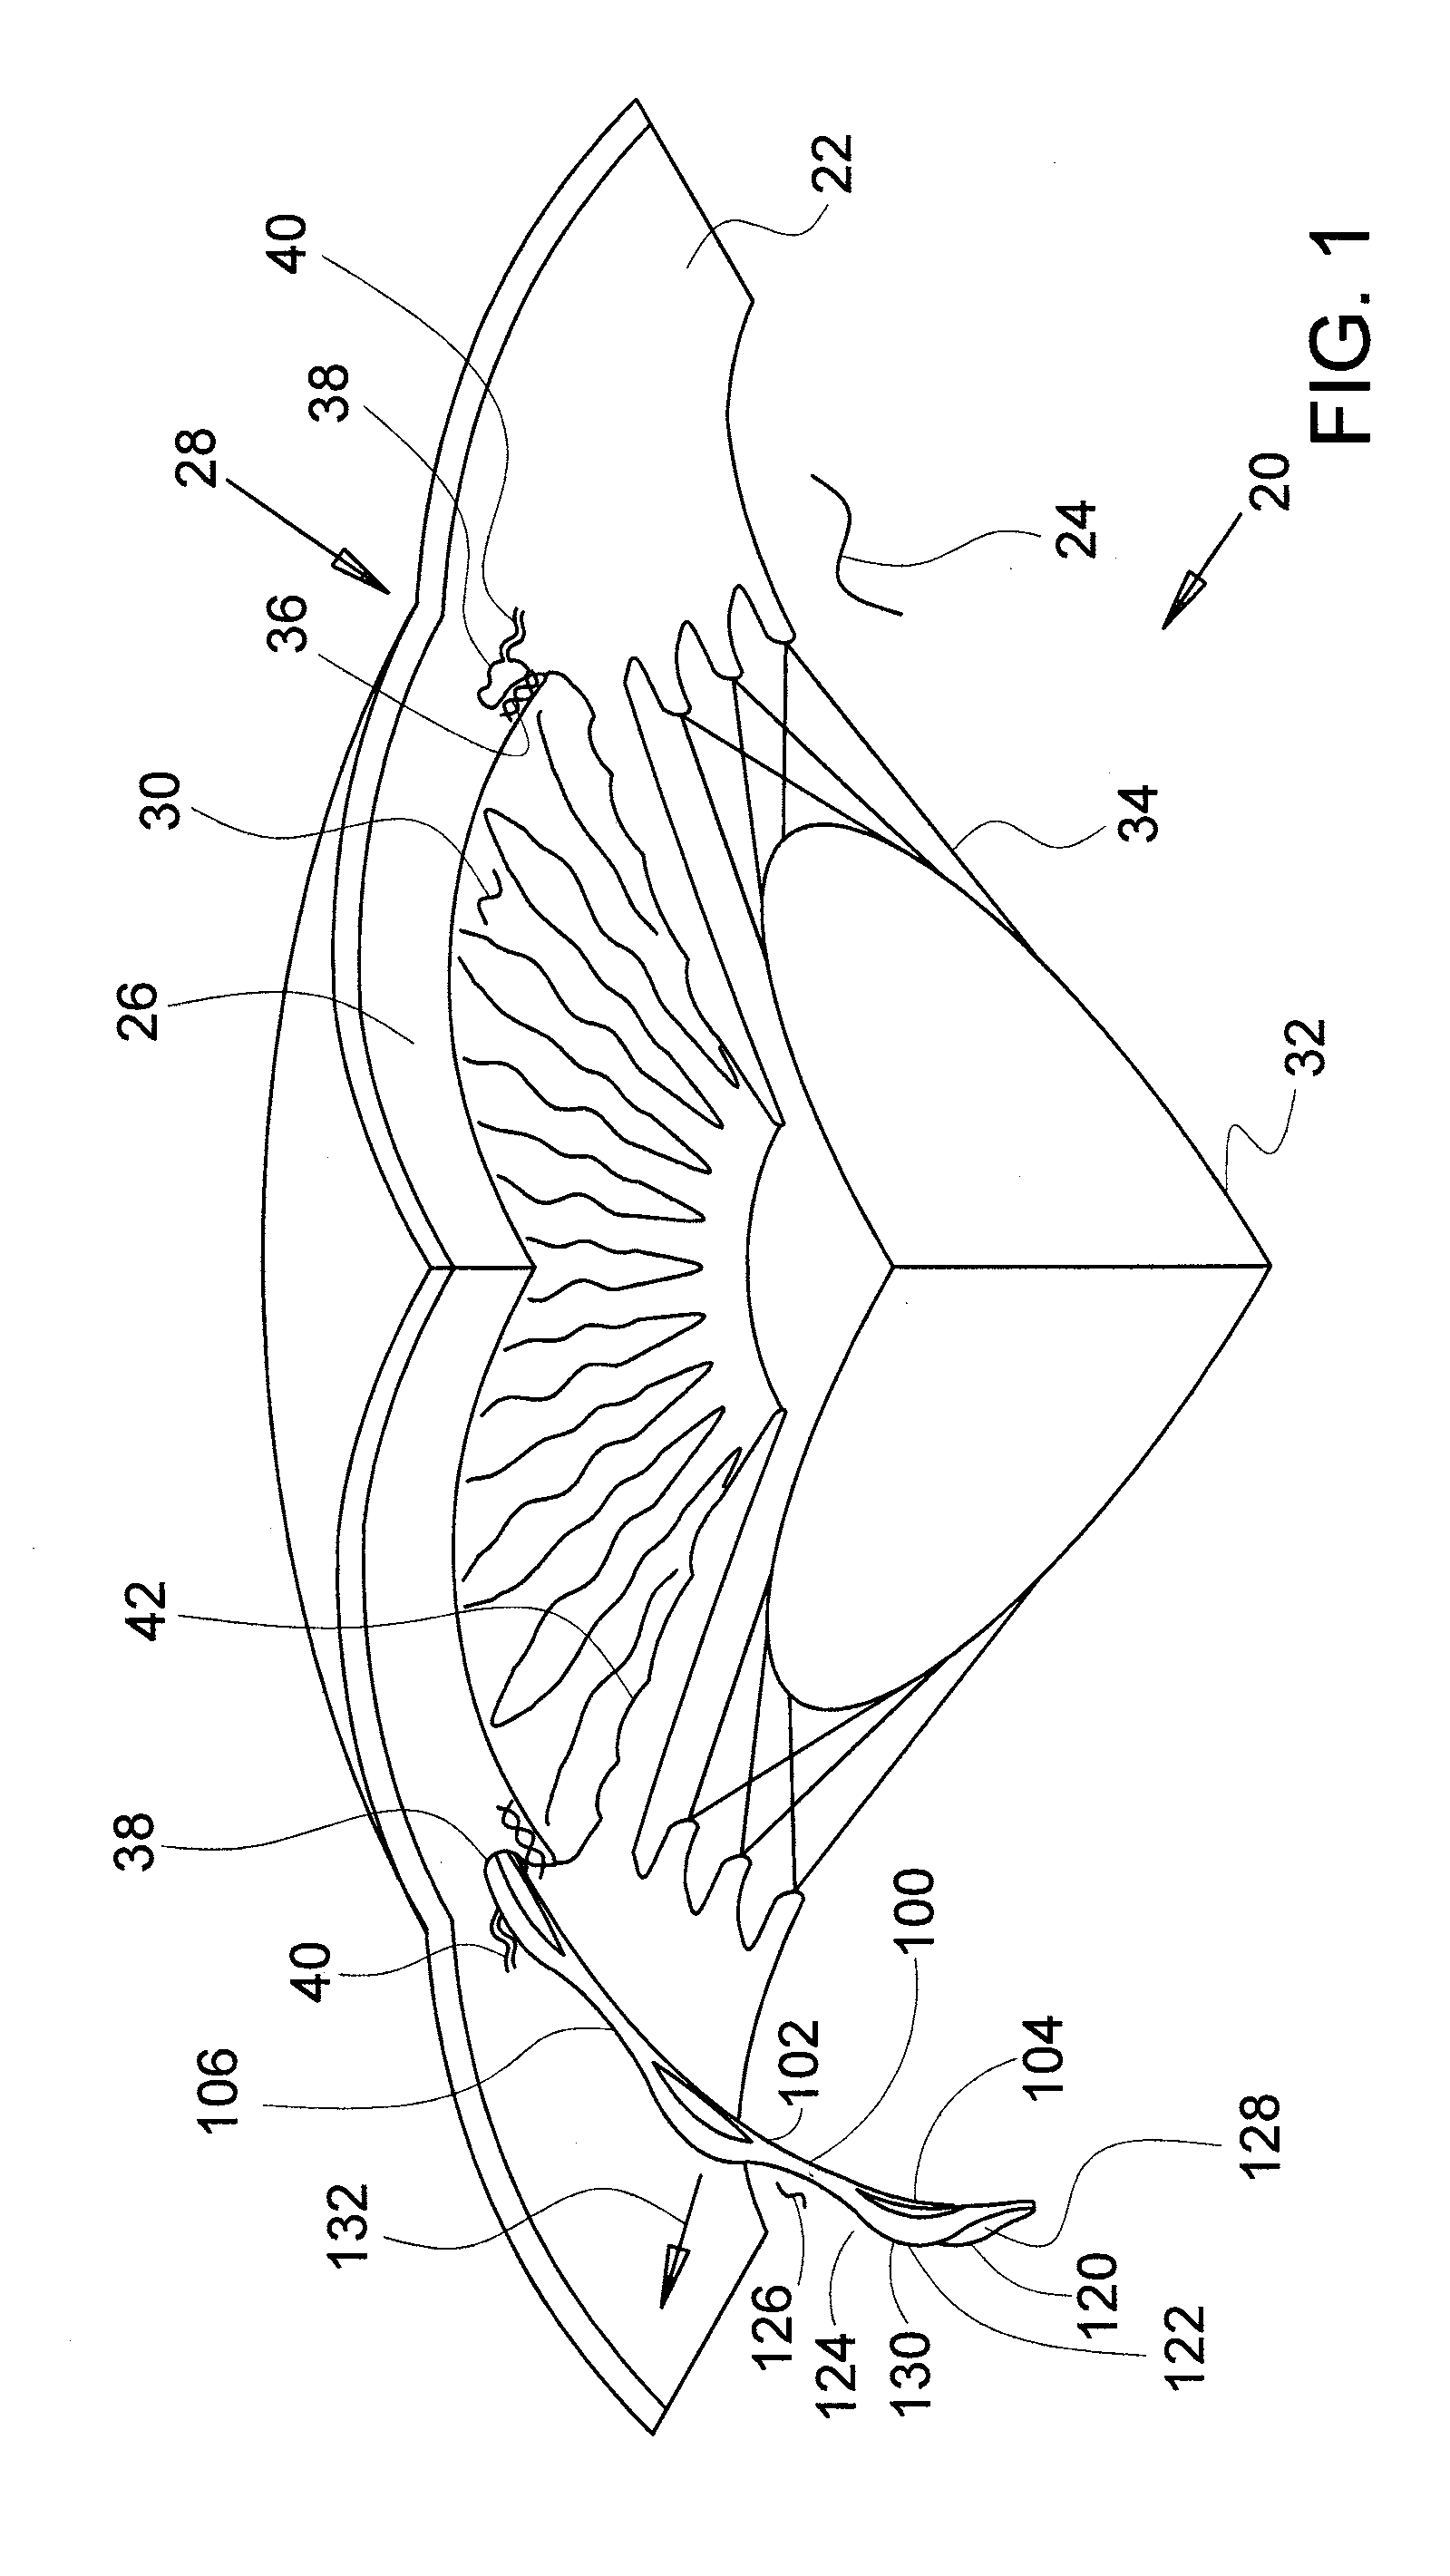 Methods and apparatus for delivering ocular implants into the eye